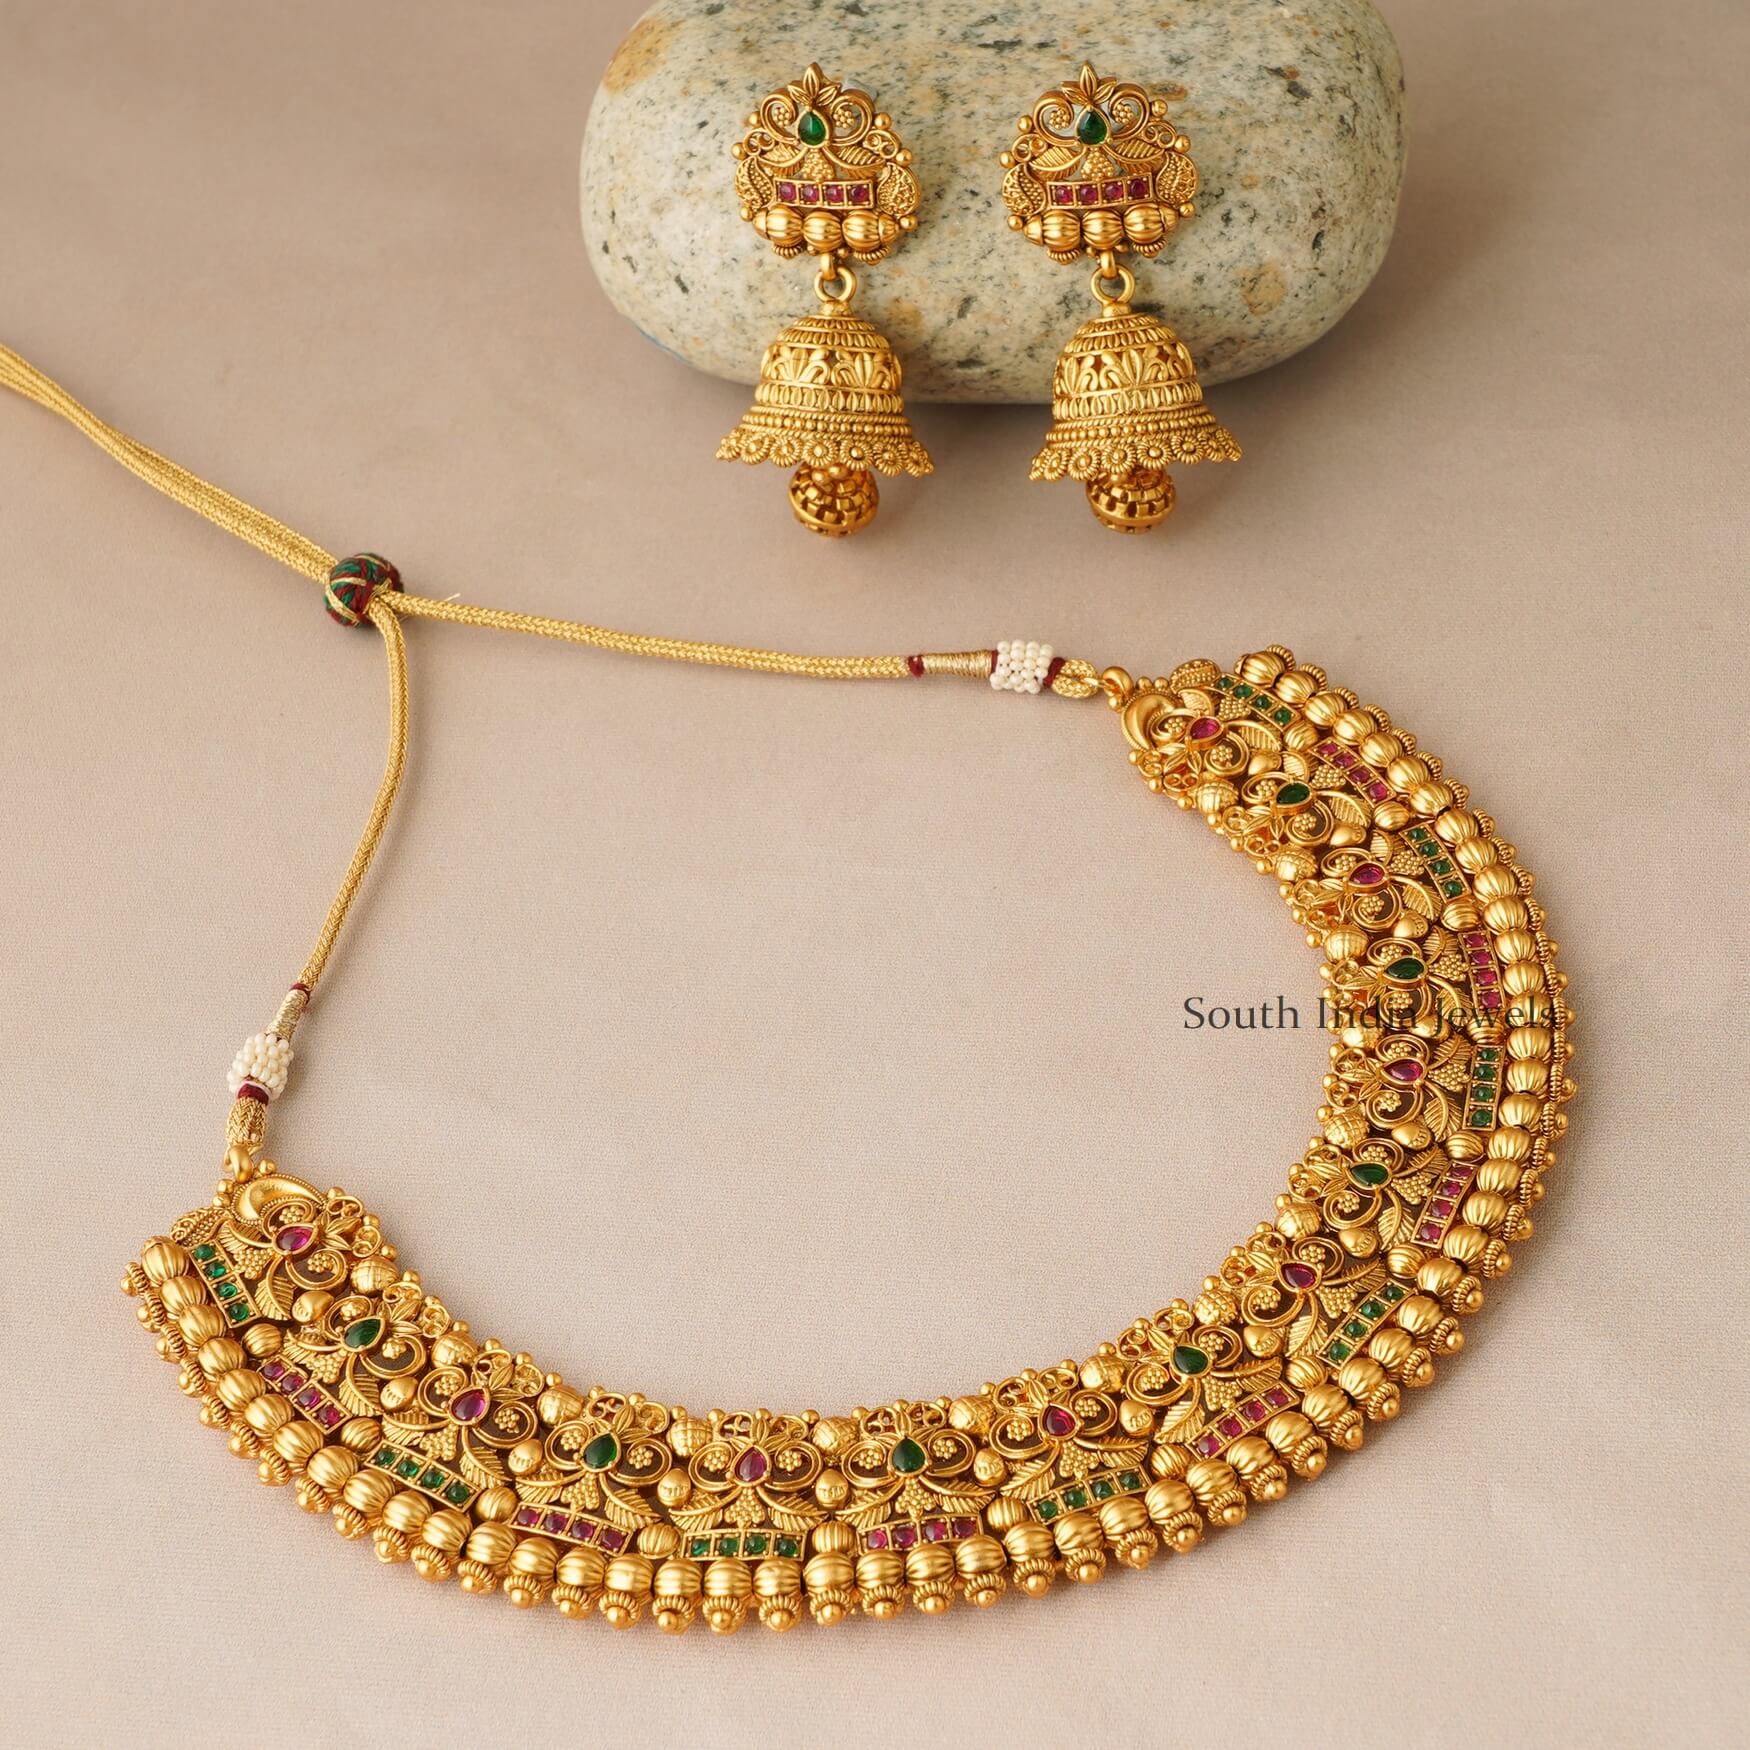 Intricate Stone Gold Finish Necklace - South India Jewels